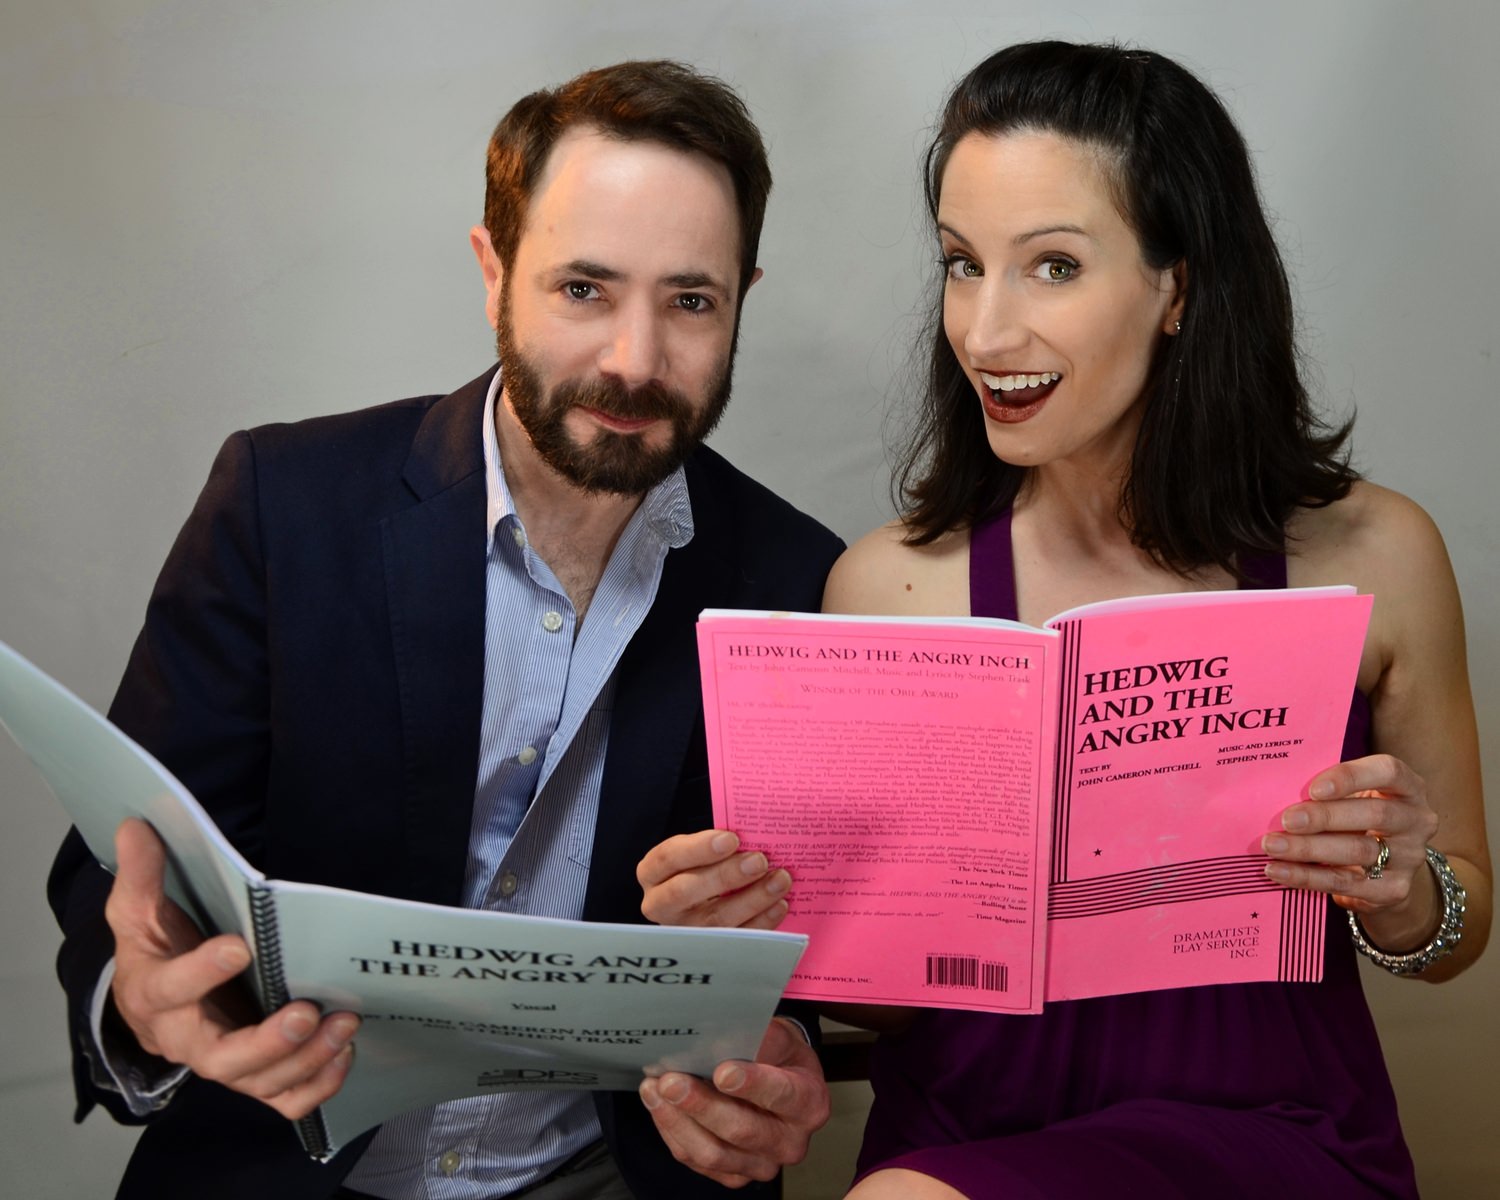 Dane Peterson and Tawny Stephens will star in the Birmingham production of HEDWIG and the ANGRY INCH, playing the Virginia Samford Theatre, June 2-13, 2015.
Photo Credit: David Garrett 1